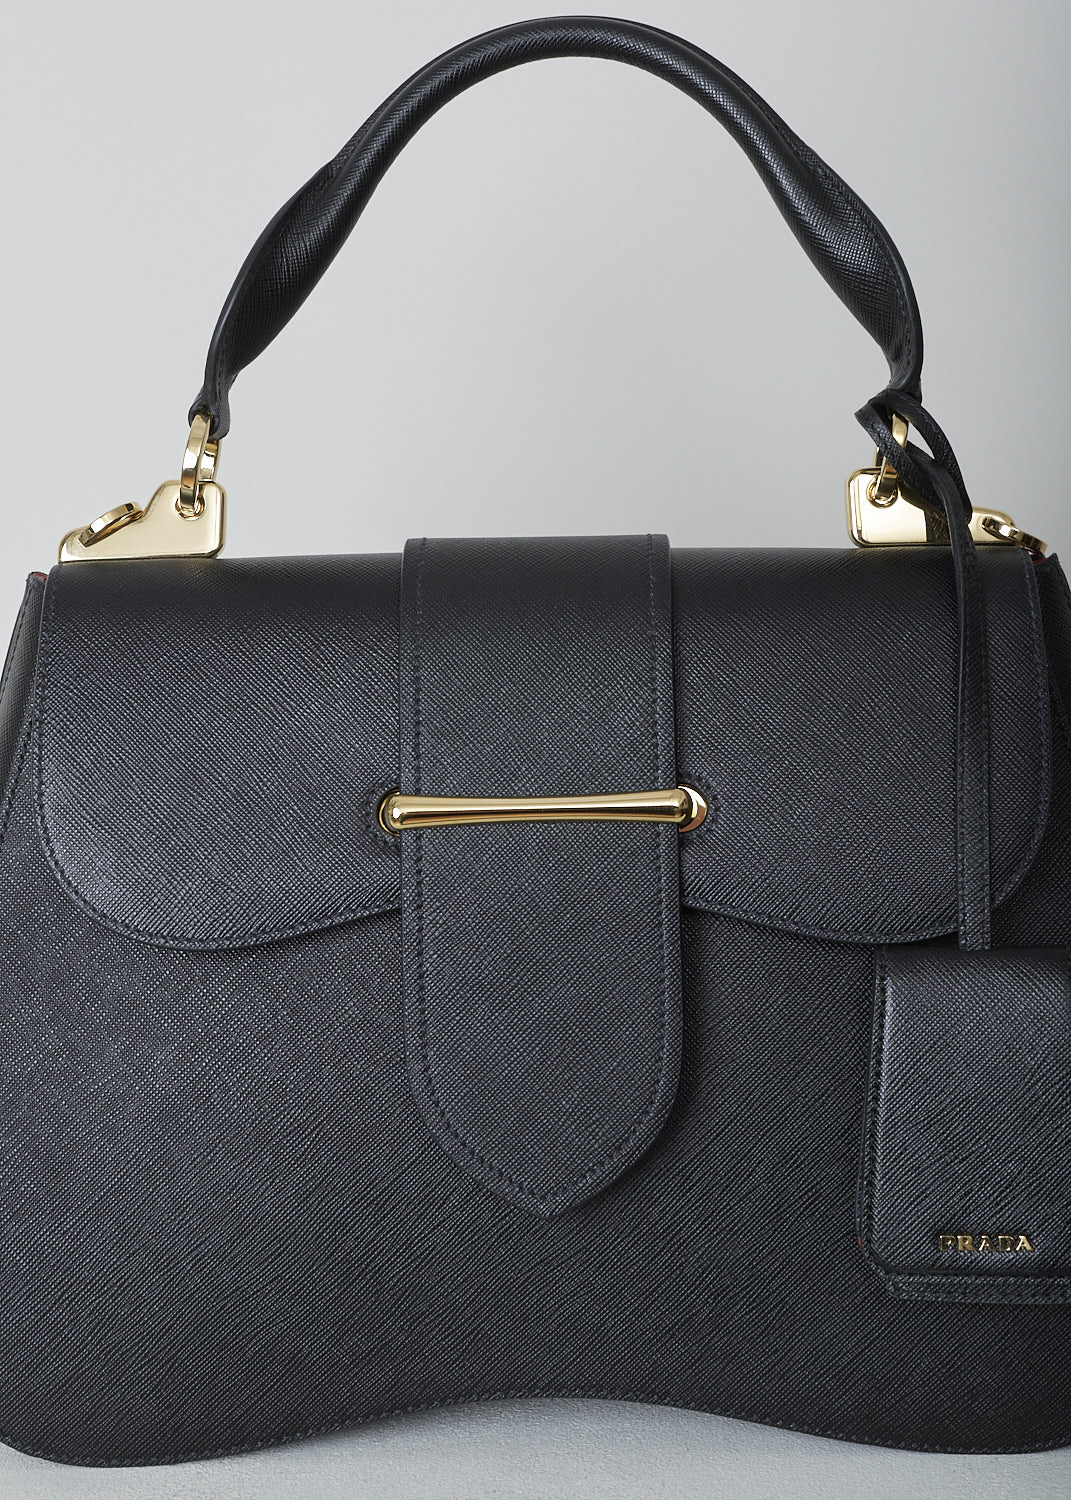 PRADA, LARGE SIDONIE TOP HANDLE BAG IN BLACK, CARTELLA_1BN002_F0002_NERO, Black, Detail, This large black Sidonie Top Handle Bag is made with Saffiano leather. The bag comes with a leather handle and an adjustable and detachable shoulder strap. The bag has gold-tone metal hardware with the brand's logo on the back. The removable leather keychain has that same gold-tone logo on it. The slip-through closure opens up to reveal its red interior. The bag has a single, spacious compartment with a zipped inner pocket to one side and a patch pocket on the other side.  

